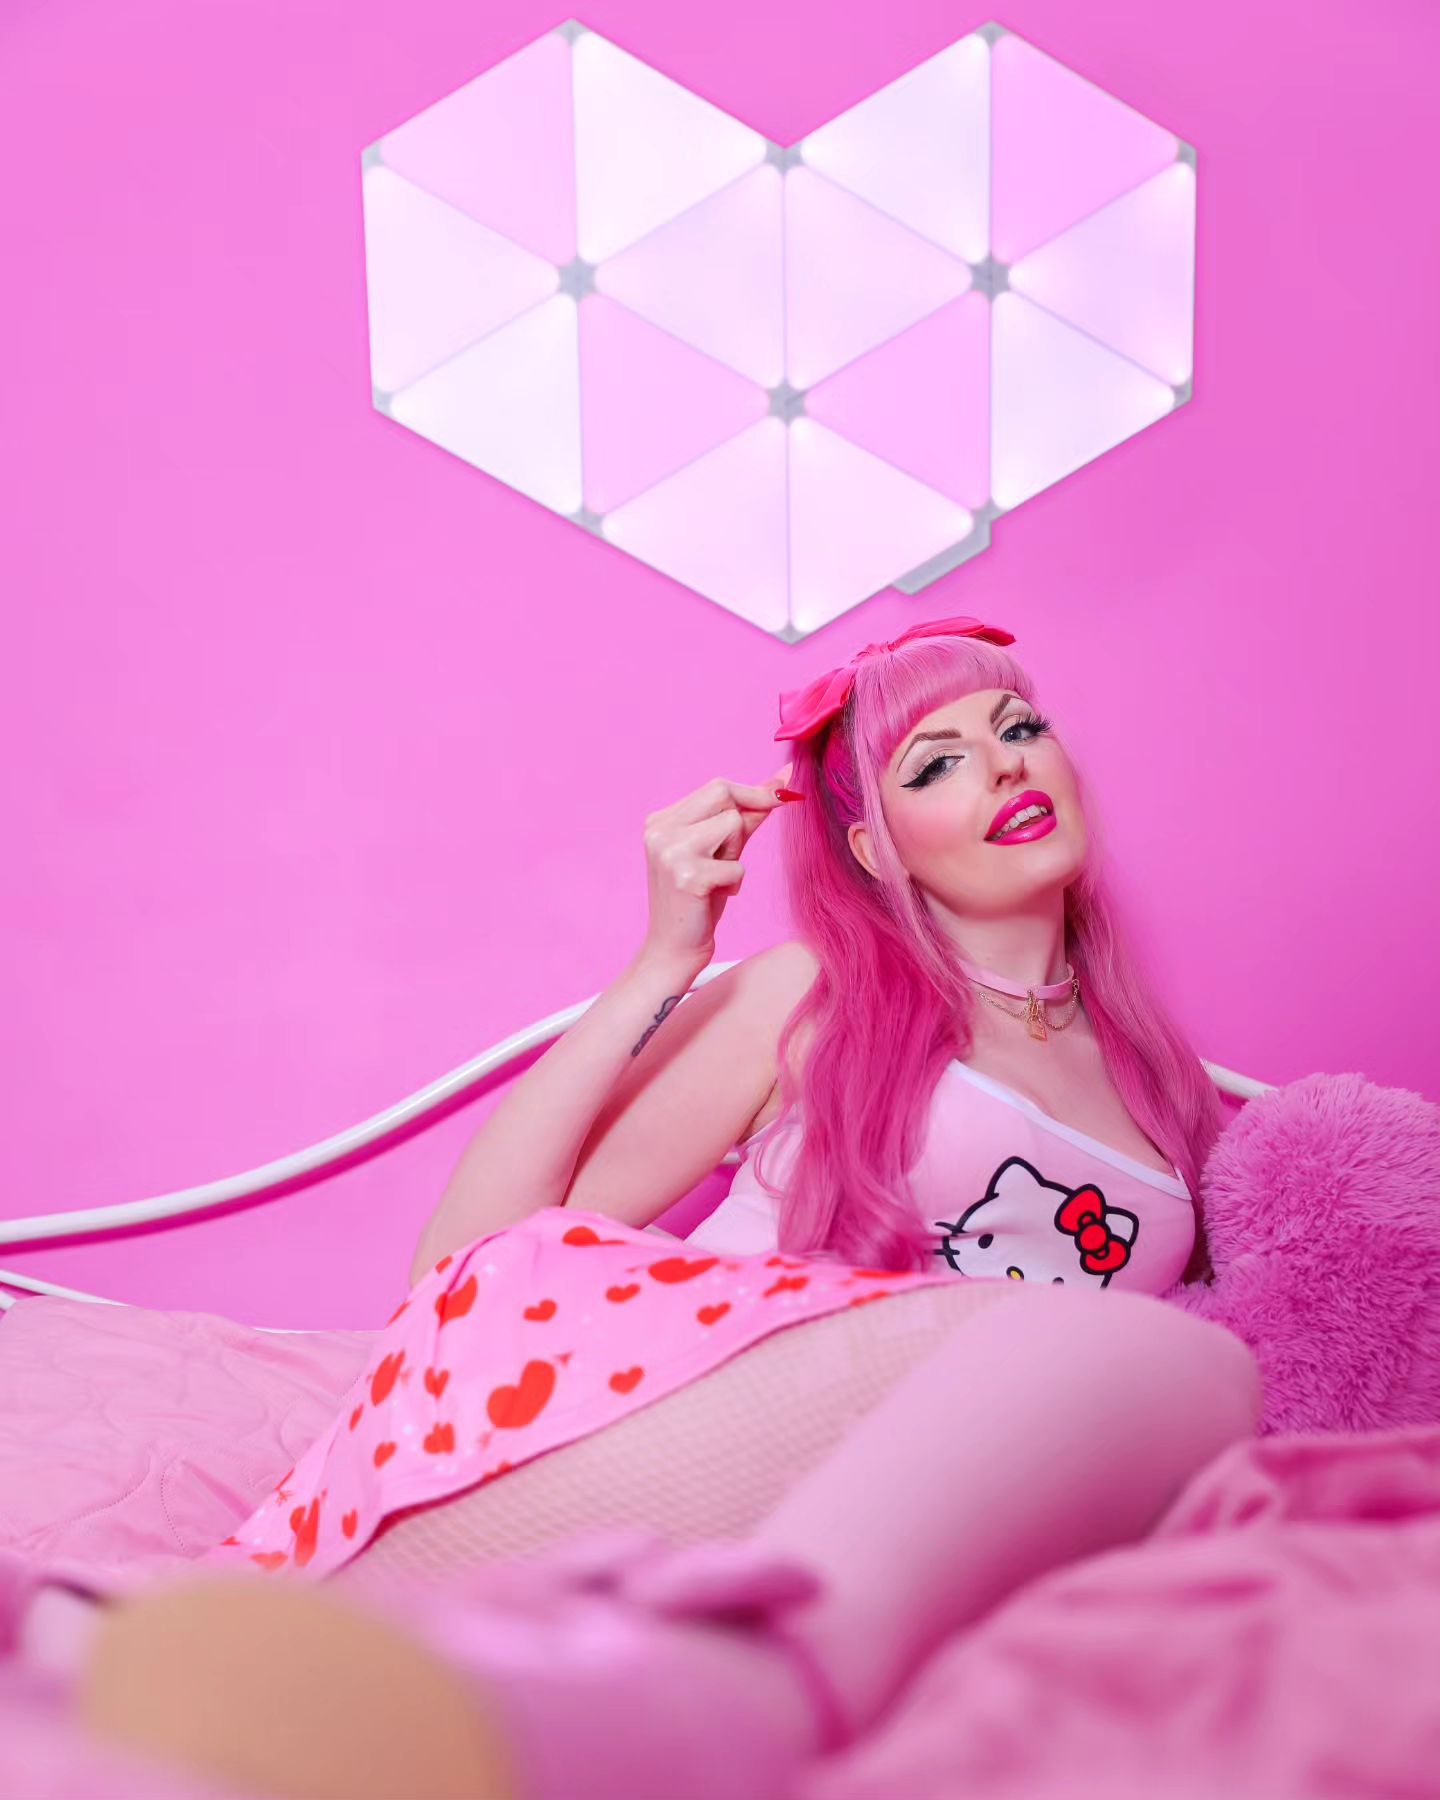 ♡What did you do for Valentines Day?♡
I got taken out to brunch and dinner!♥︎ 

Thank you to @nanoleaf and @rocketcommsanz for setting me up with the purrfect lights for Vday!🩷
You can use code Mkitty10 for 10% off your own nanoleafs!
Or type this in! 
https://go.nanoleaf.me/mkittyxoxo

#nanoleaf #nanoleaf #gifted #egirl #heartiest #heart #valentines #valentinesday #pink #pinkhair #hellokitty